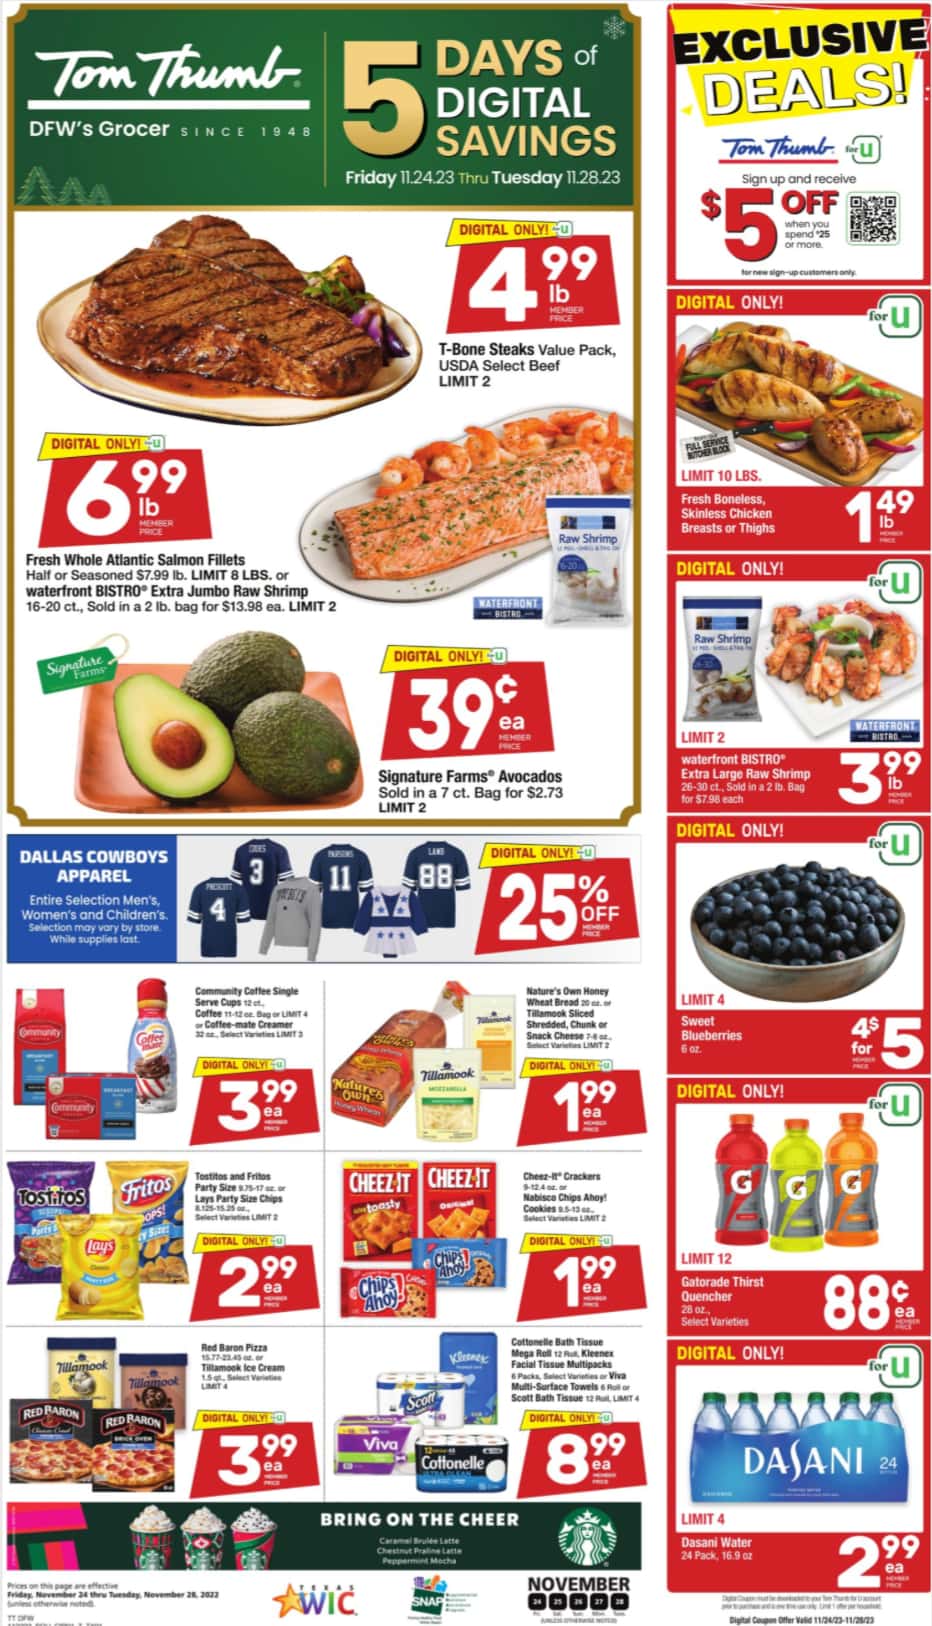 Tom Thumb Black Friday July 2024 Weekly Sales, Deals, Discounts and Digital Coupons.